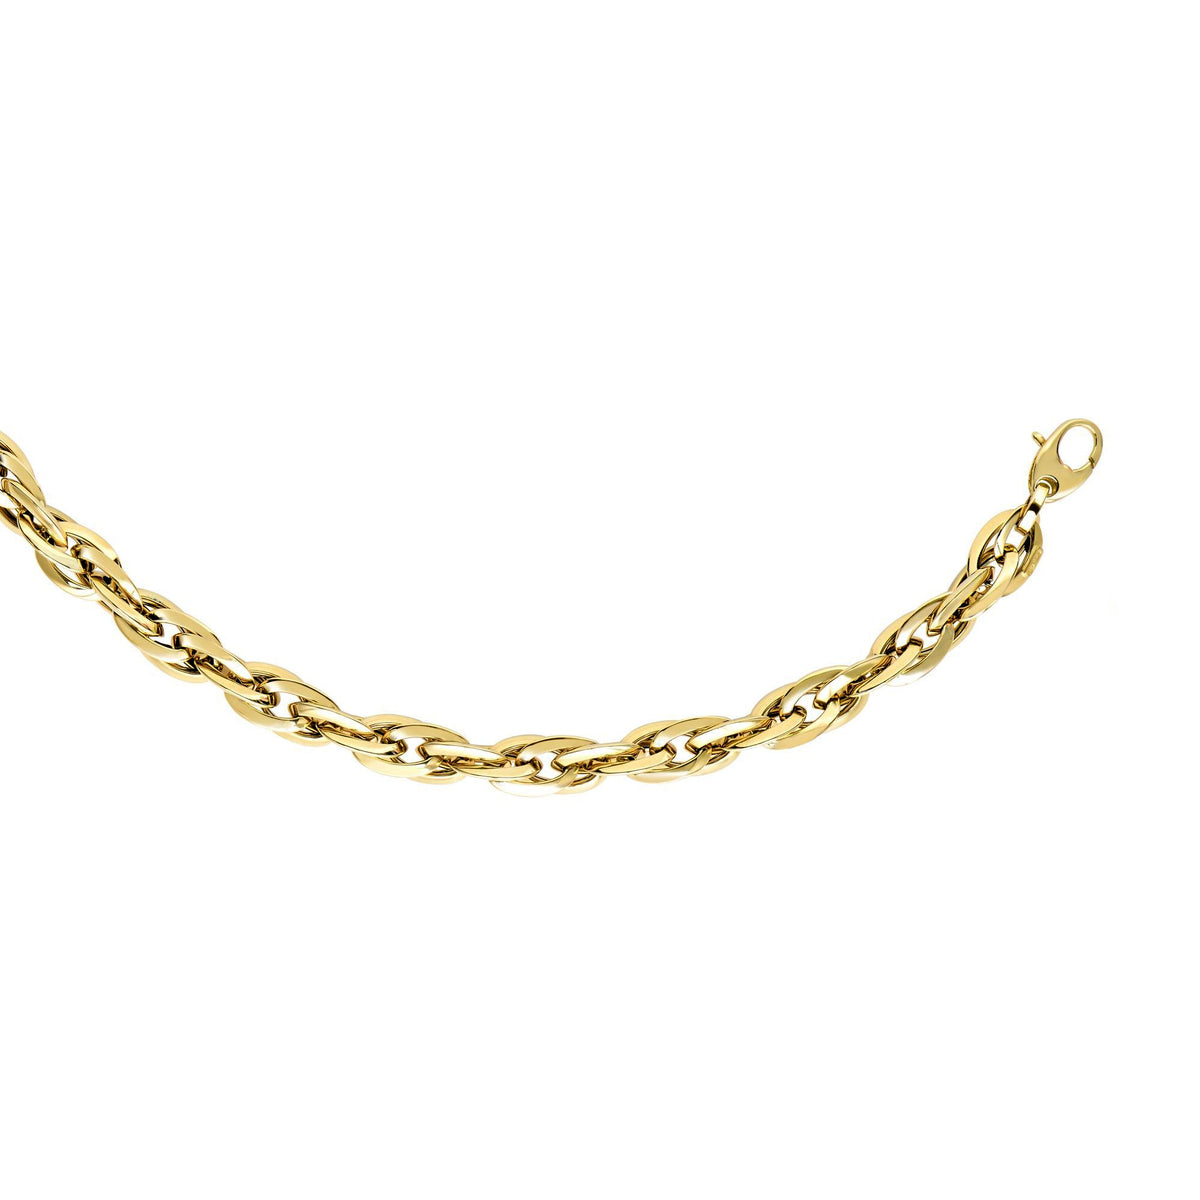 14k Yellow Gold Double Oval Link Chain Womens Necklace, 18"